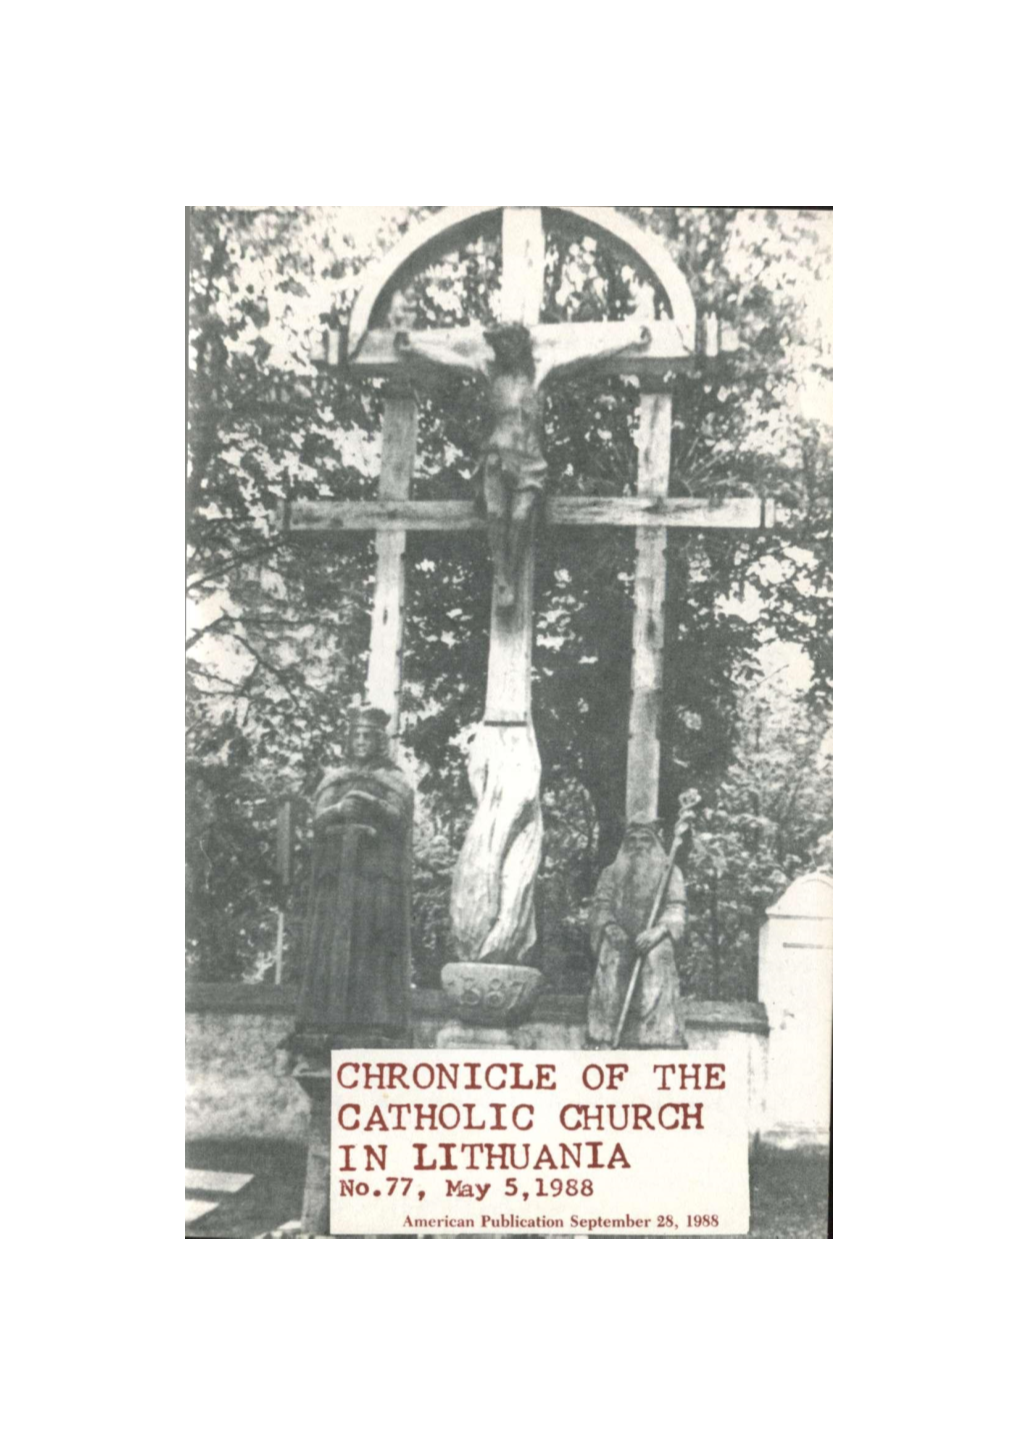 Chronicle of the Catholic Church in Lithuania, No. 77